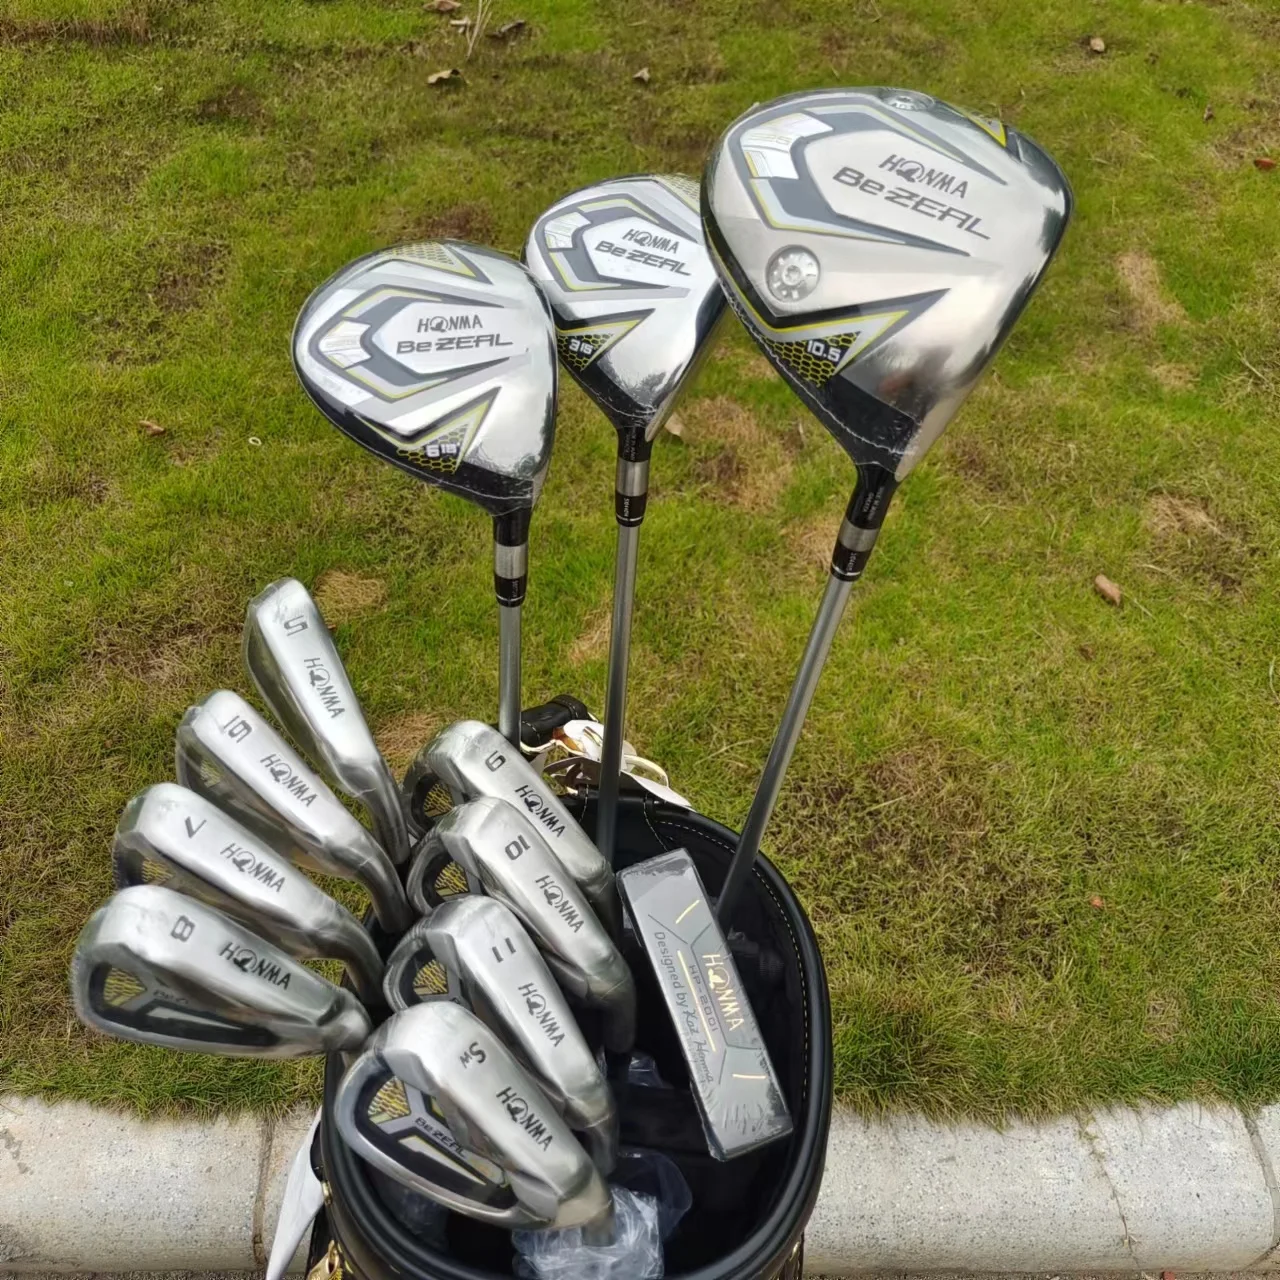 HONMA Golf Club Bezeal 525 Series Men's Golf Set Complete Set Without Bag Delivery Head Cover